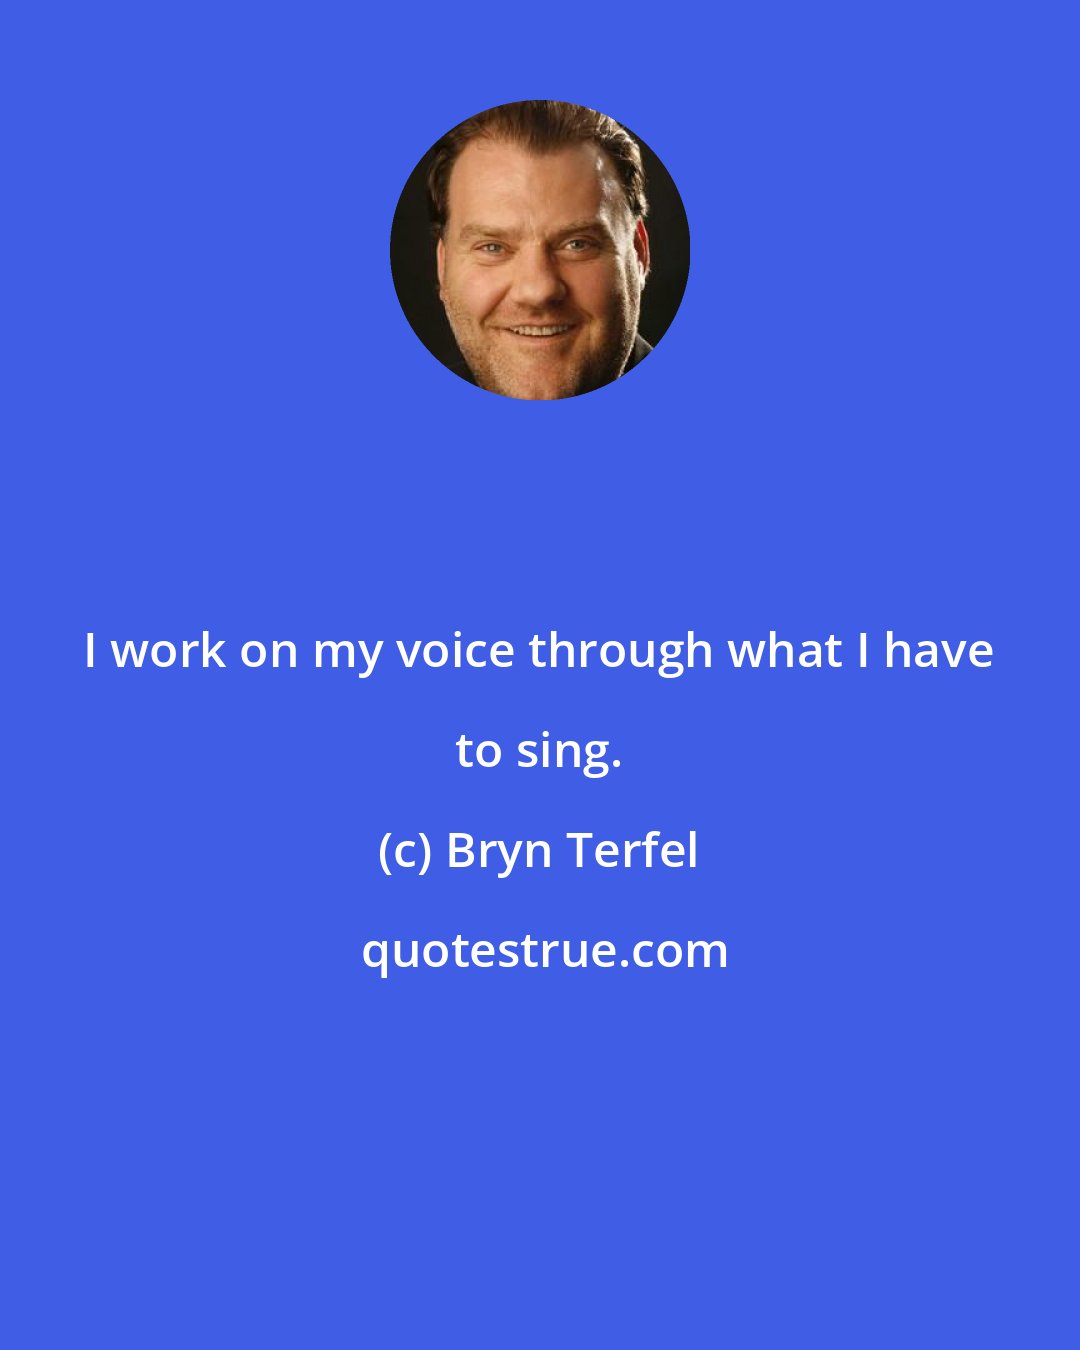 Bryn Terfel: I work on my voice through what I have to sing.